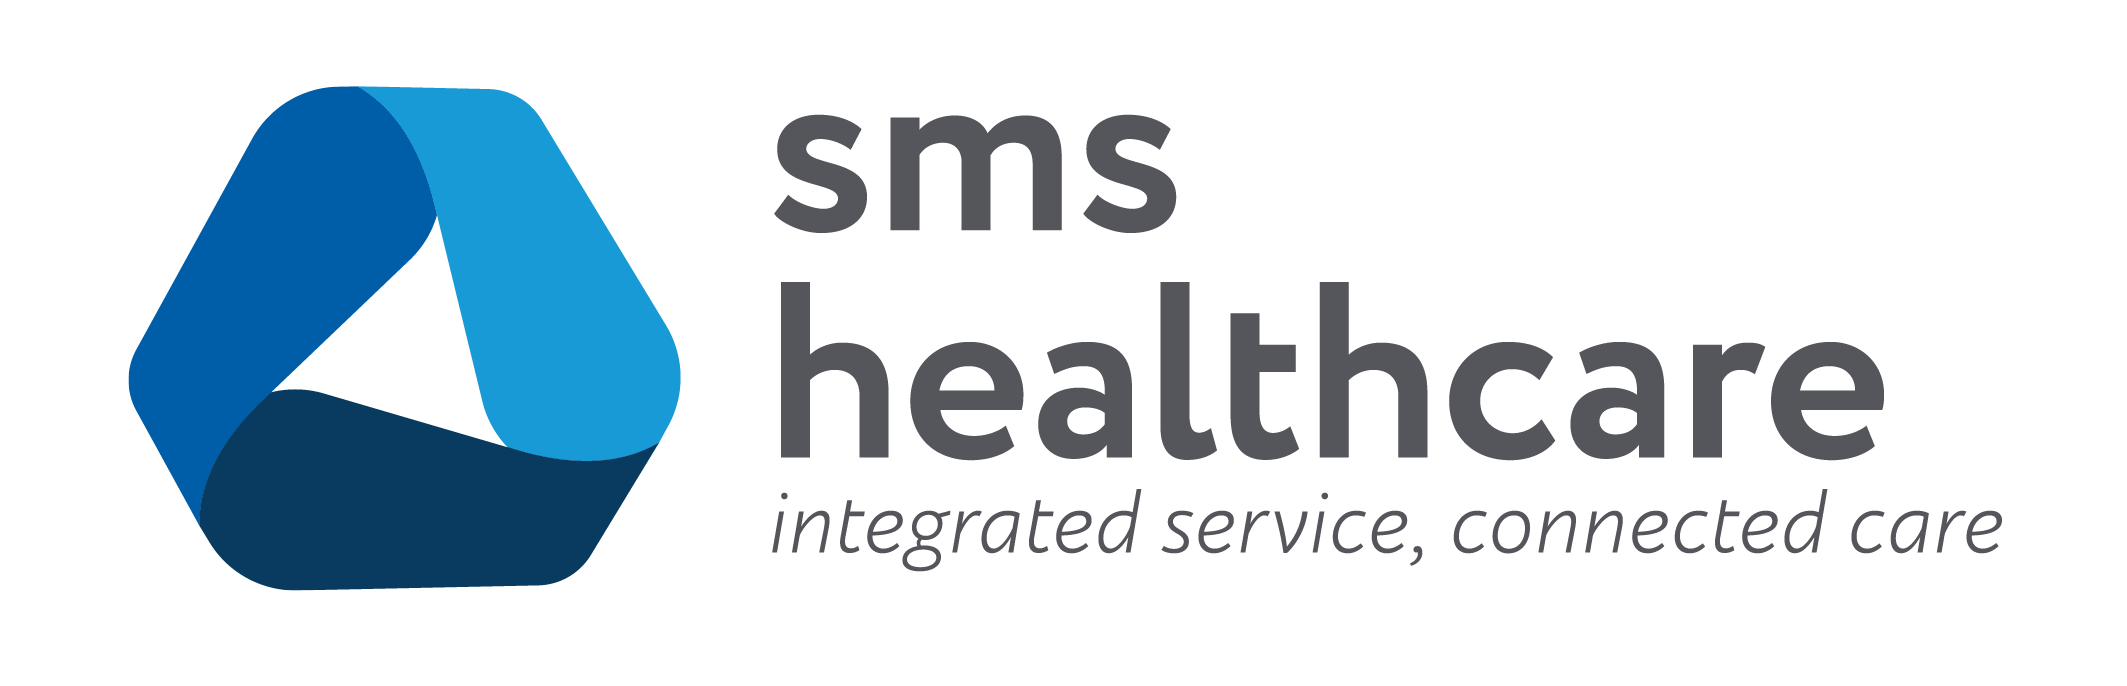 Sms Healthcare Home